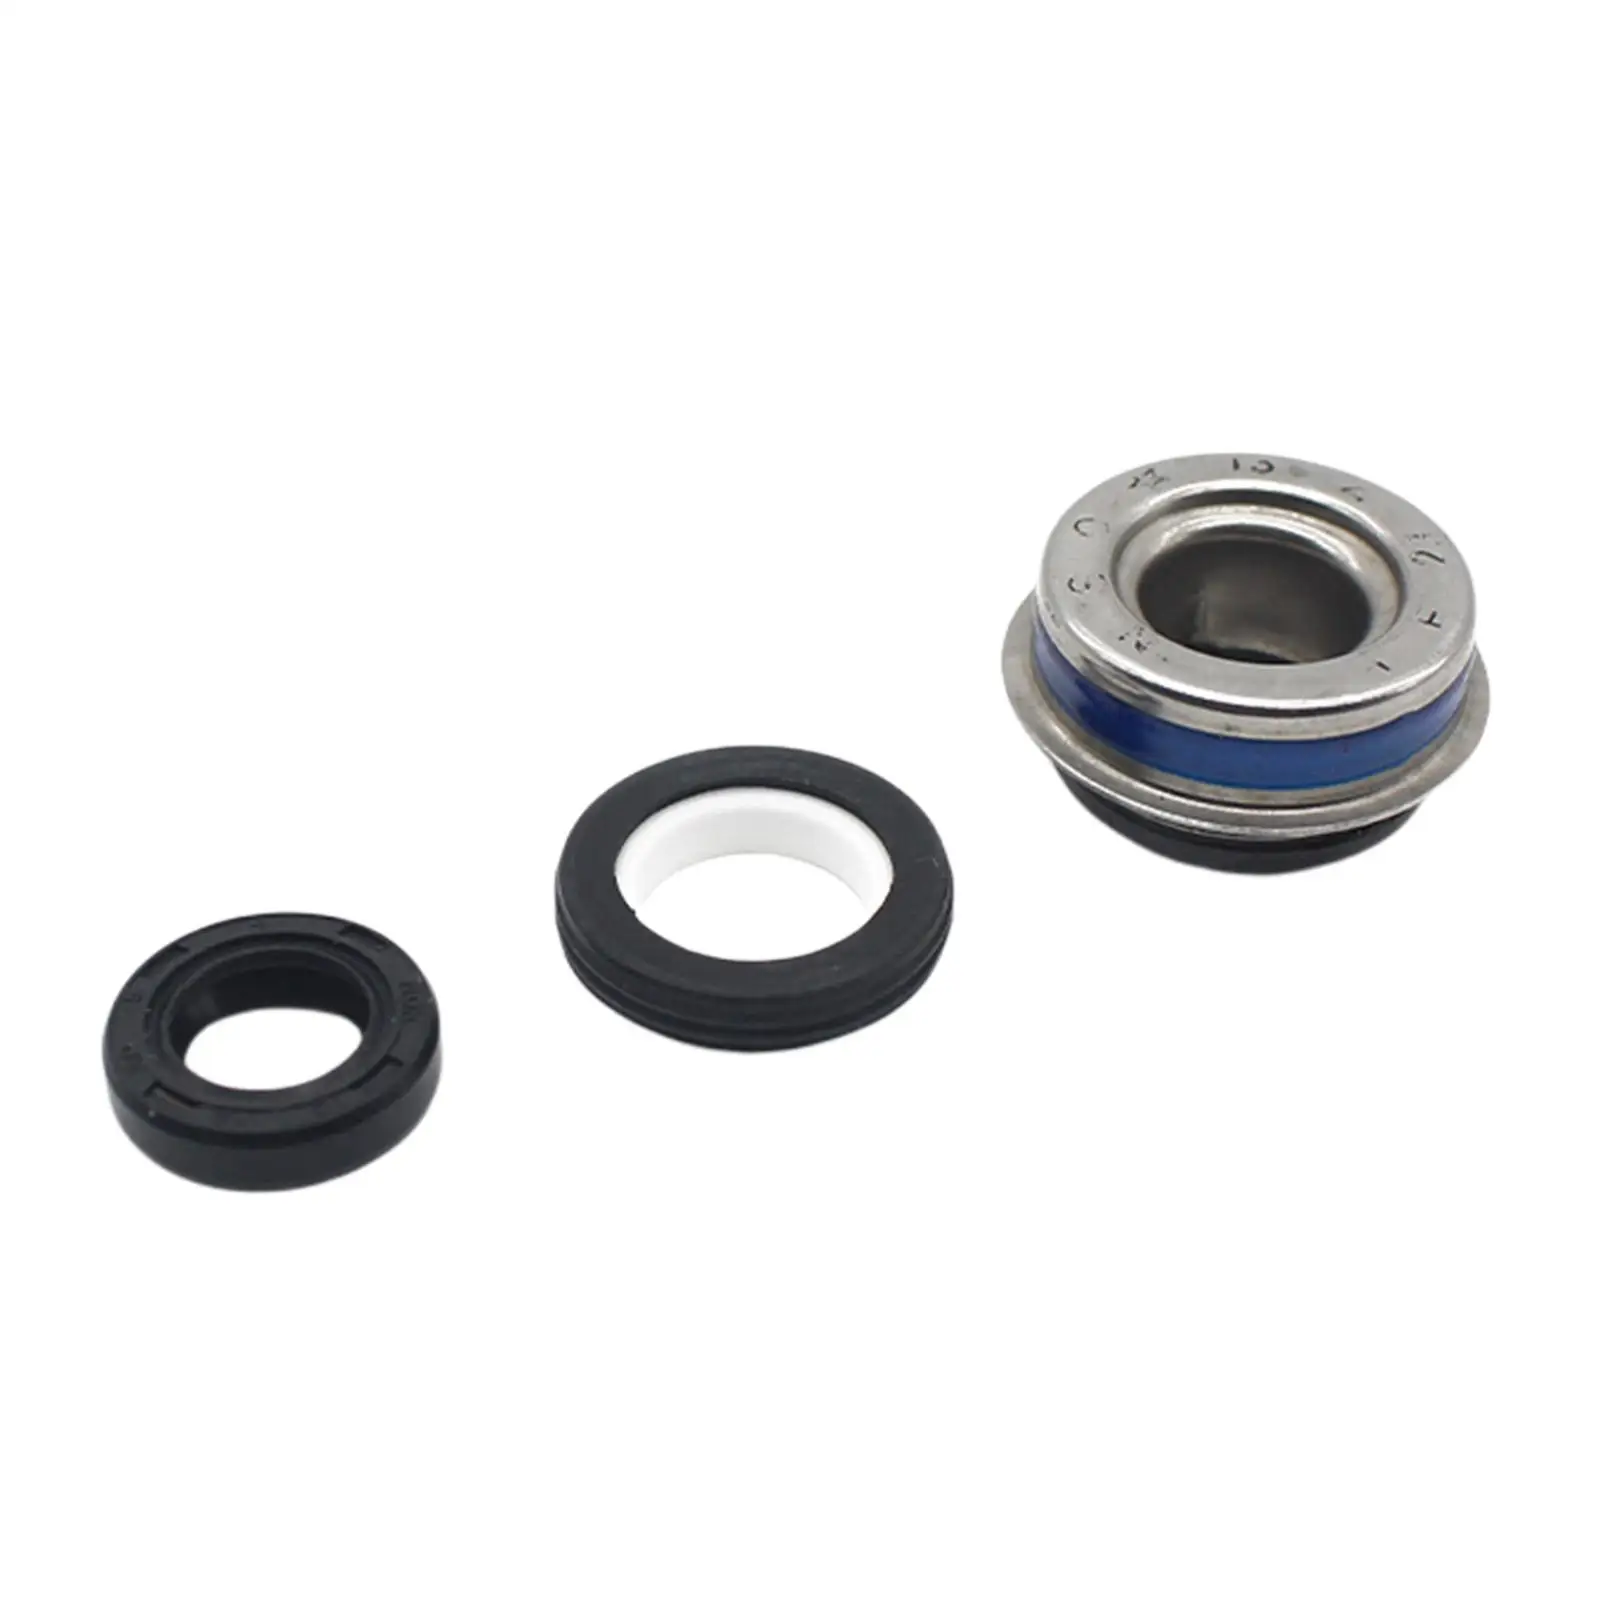 Motorbike Water Pump Mechanical Seal Kit for TM Max500 XP500 Yy-Yl-Zs 2009-2010